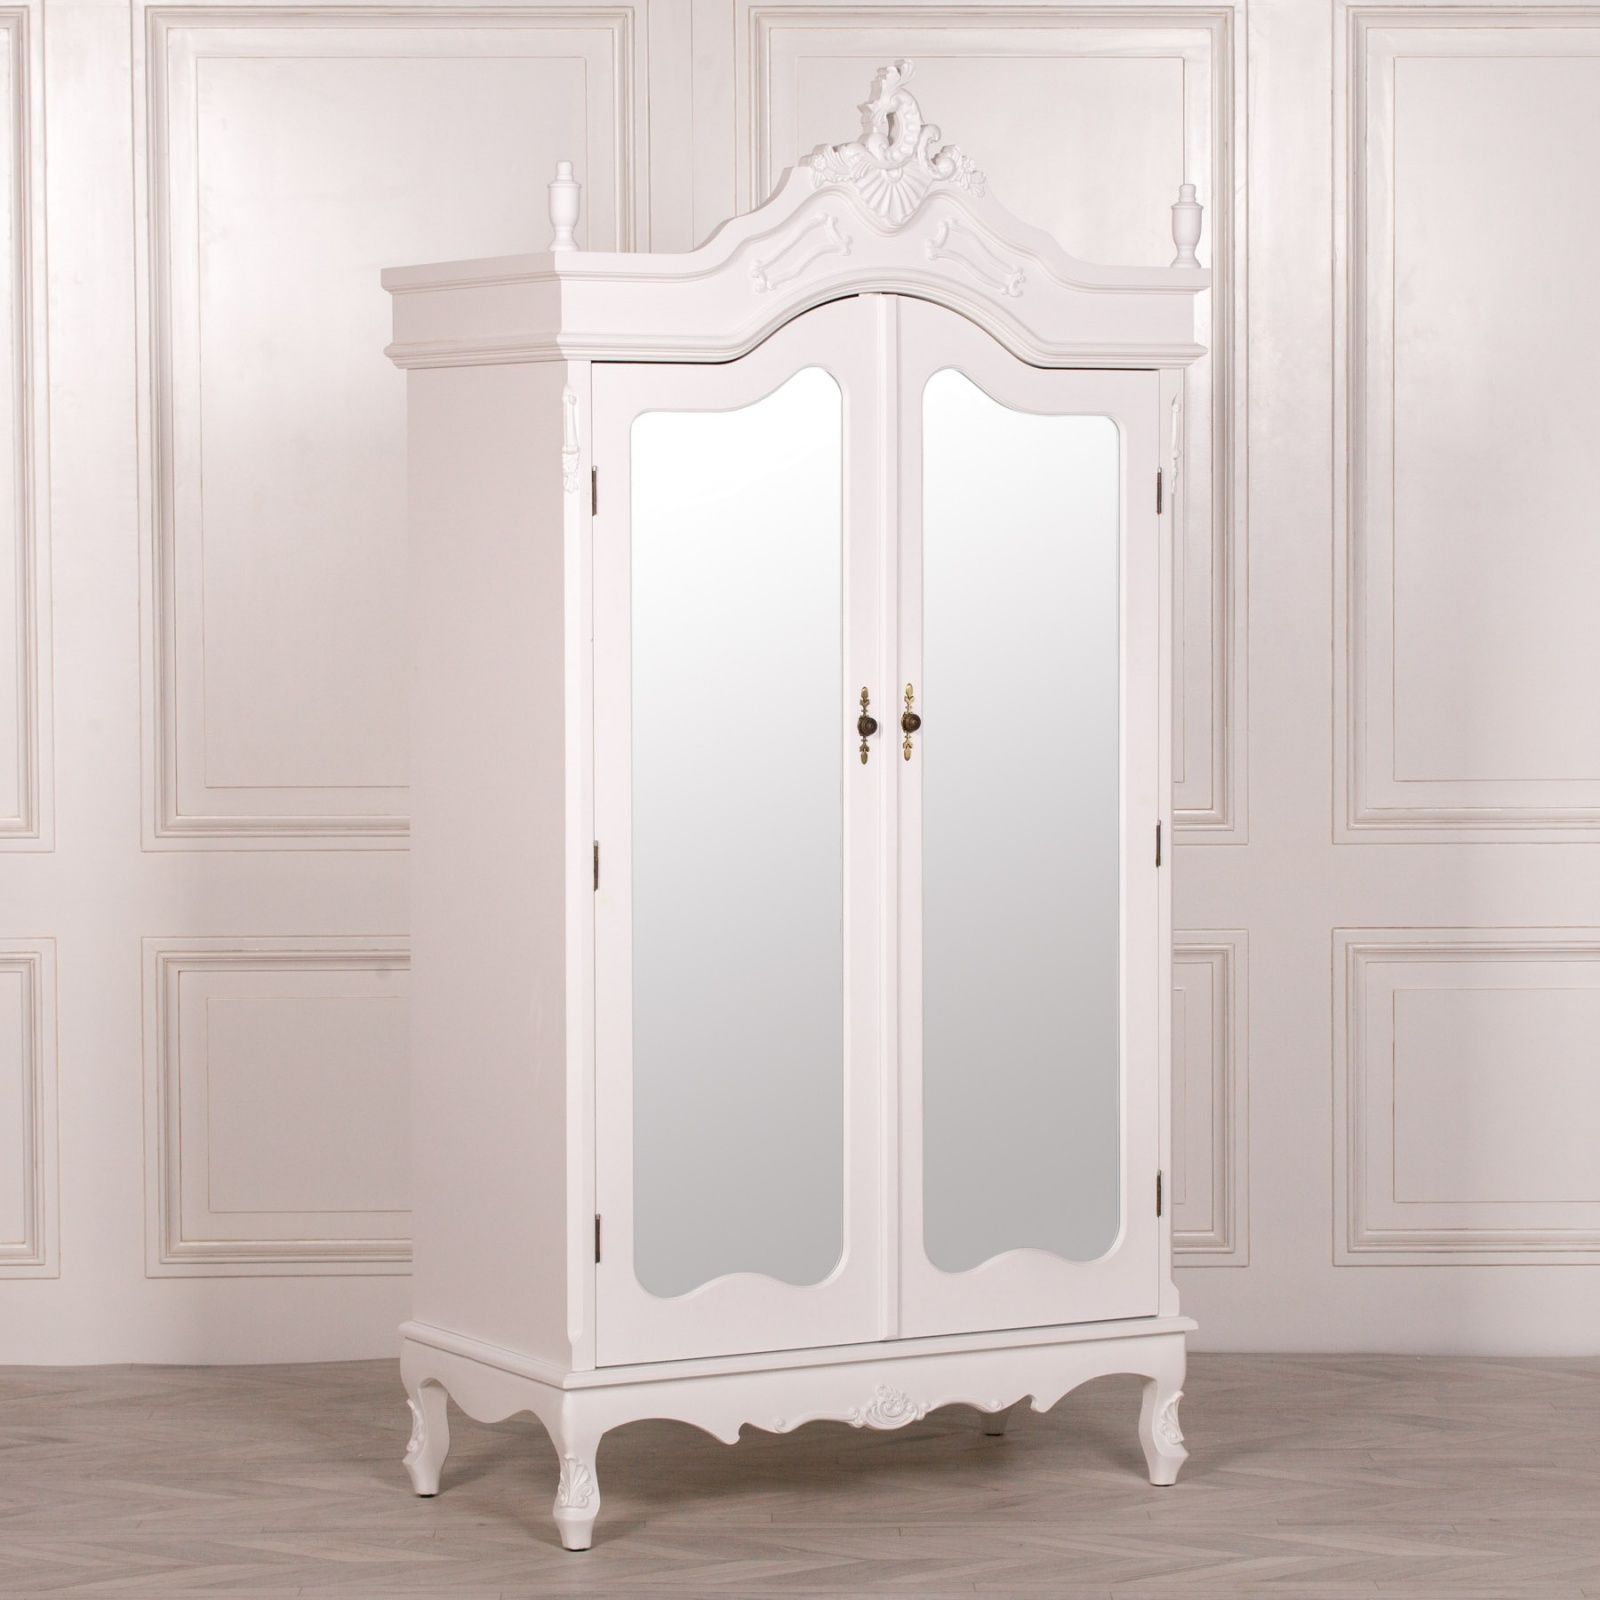 French Style Wardrobe White Mirrored Double Armoire Pertaining To French Armoires And Wardrobes (View 14 of 15)